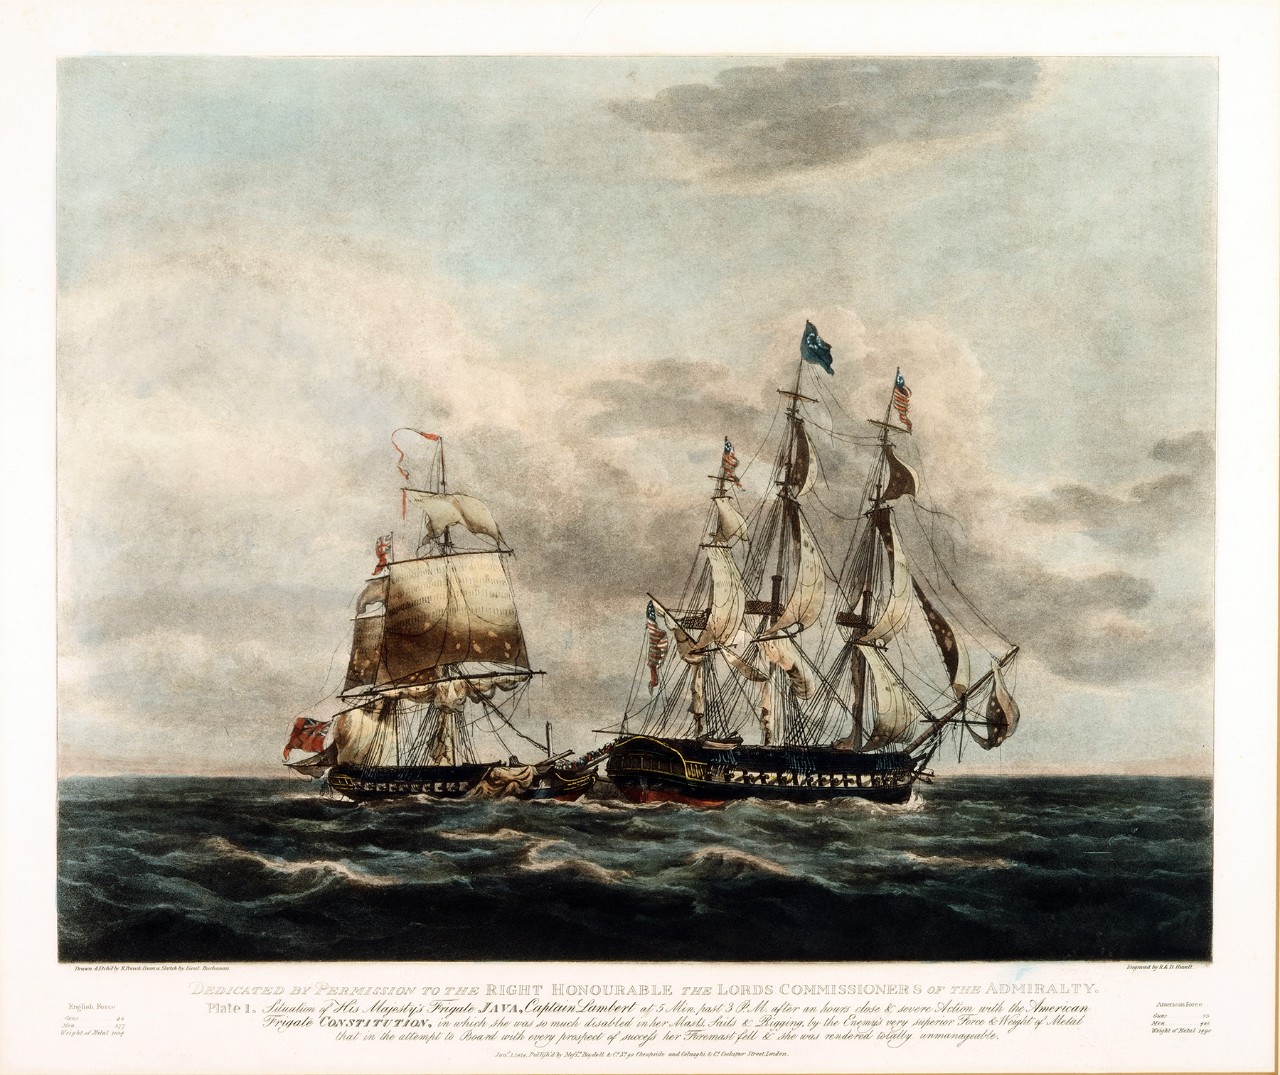 Java is on the left which has damage to the masts with Constitution on the right